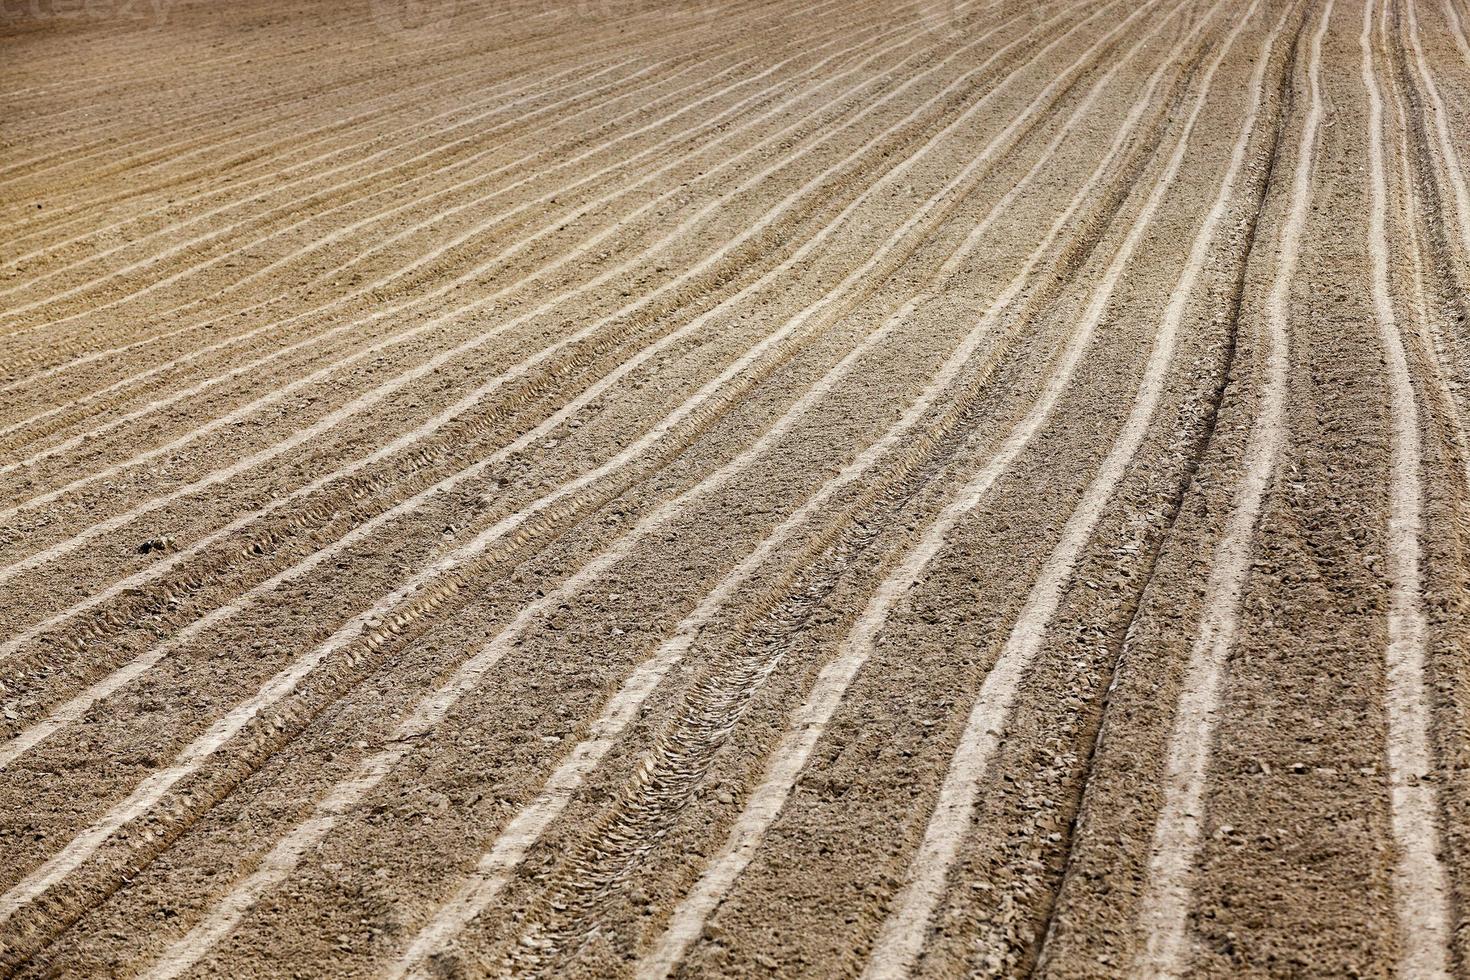 plowed agricultural land photo